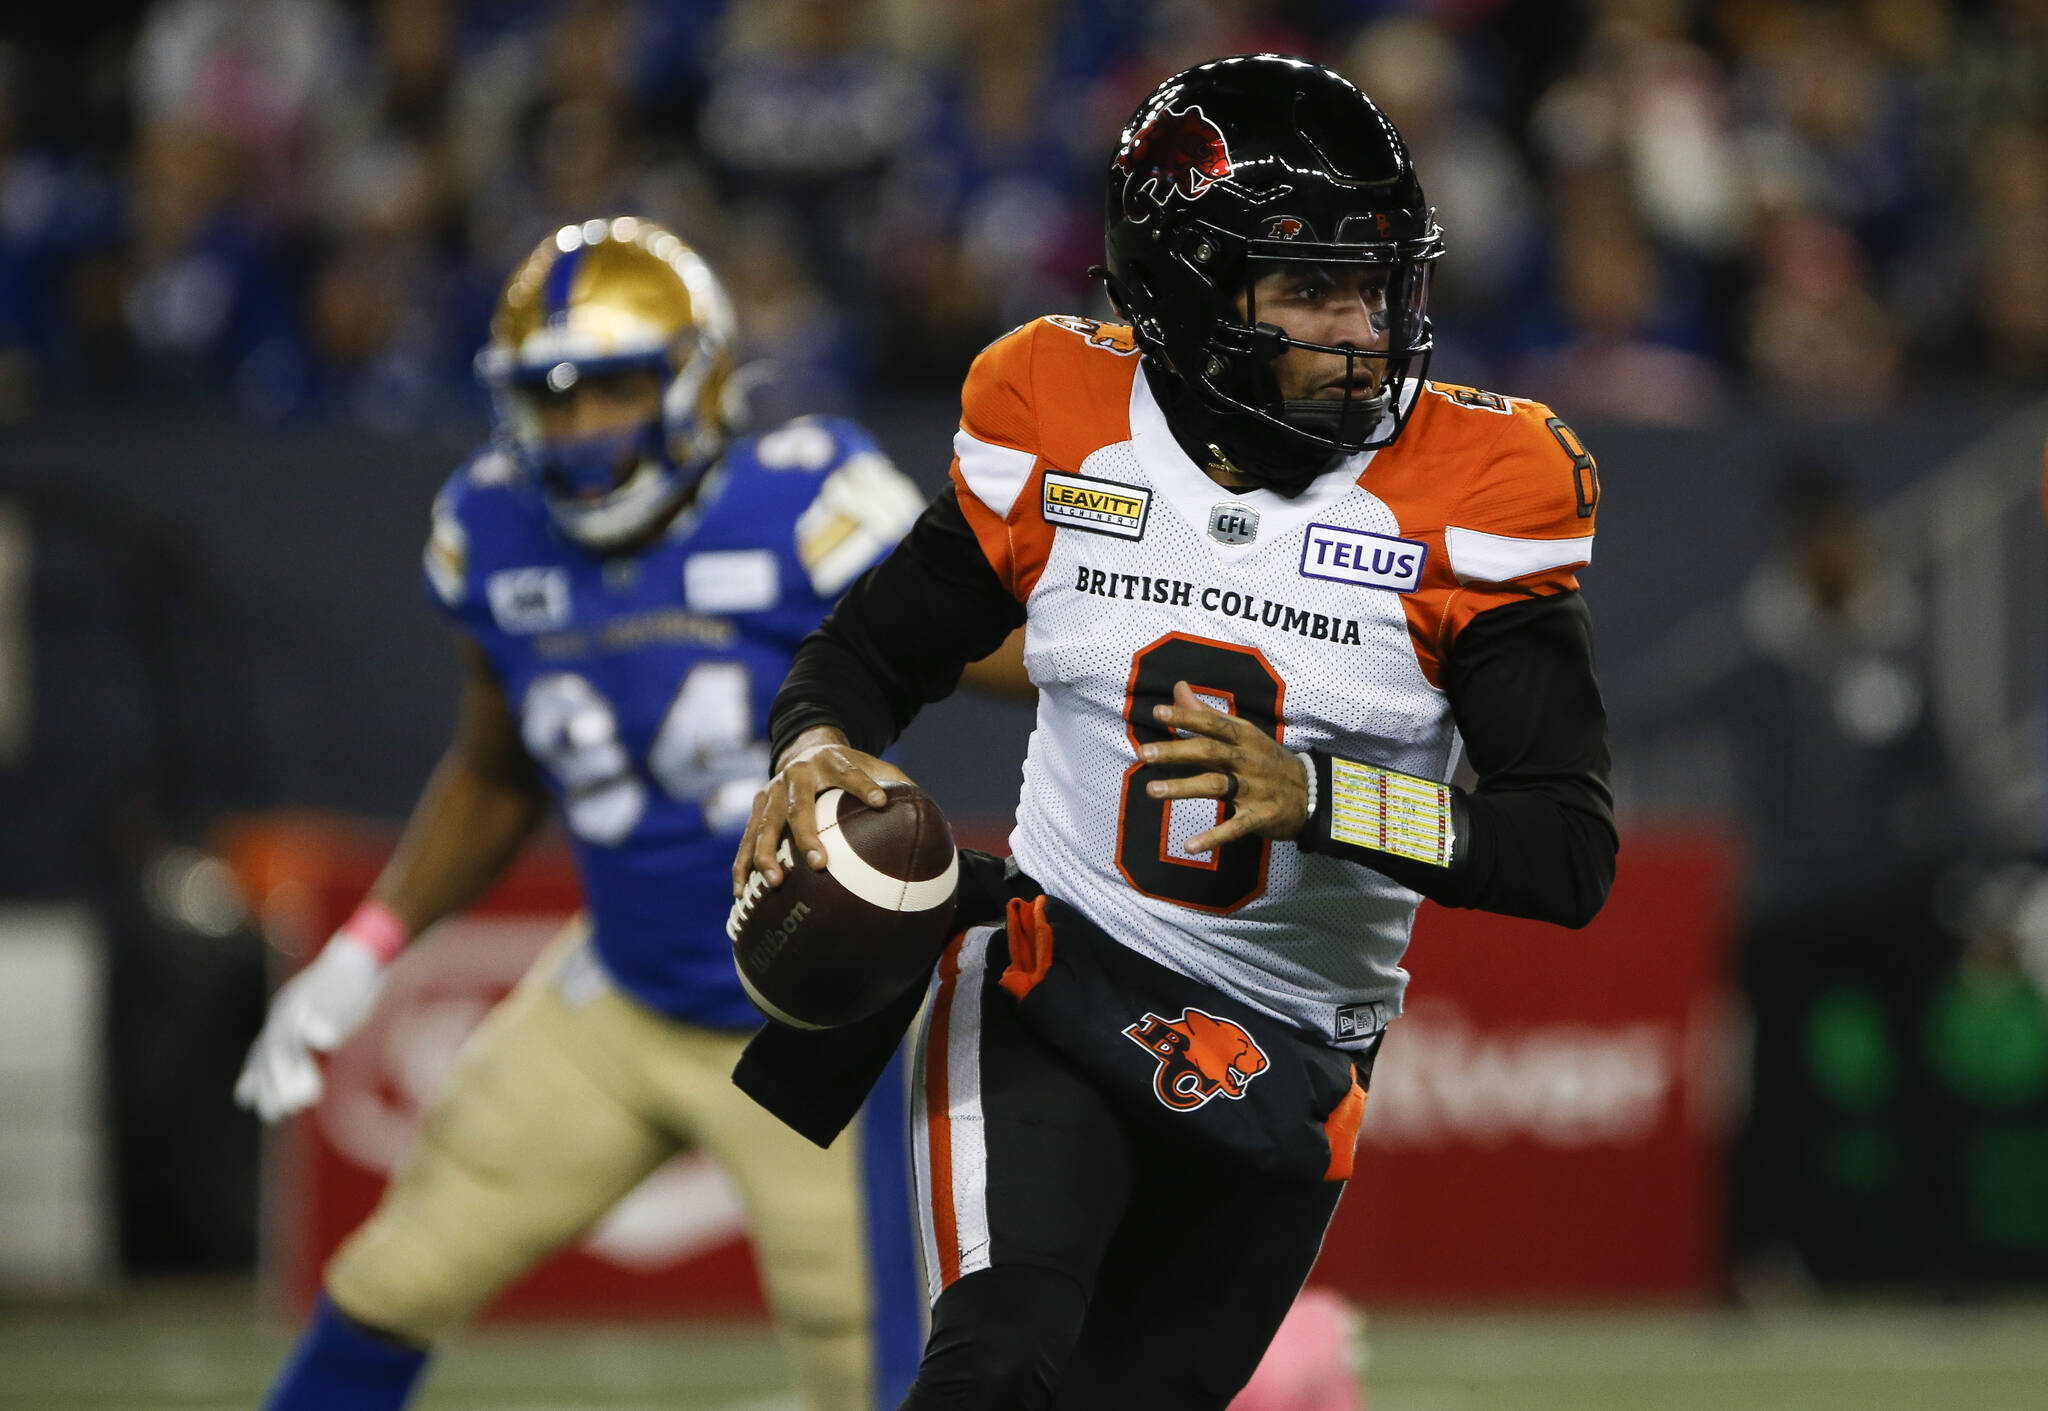 B.C. Lions quarterback Vernon Adams (8) runs for yards against the Winnipeg Blue Bombers during first half CFL action in Winnipeg Friday, October 28, 2022. THE CANADIAN PRESS/John Woods